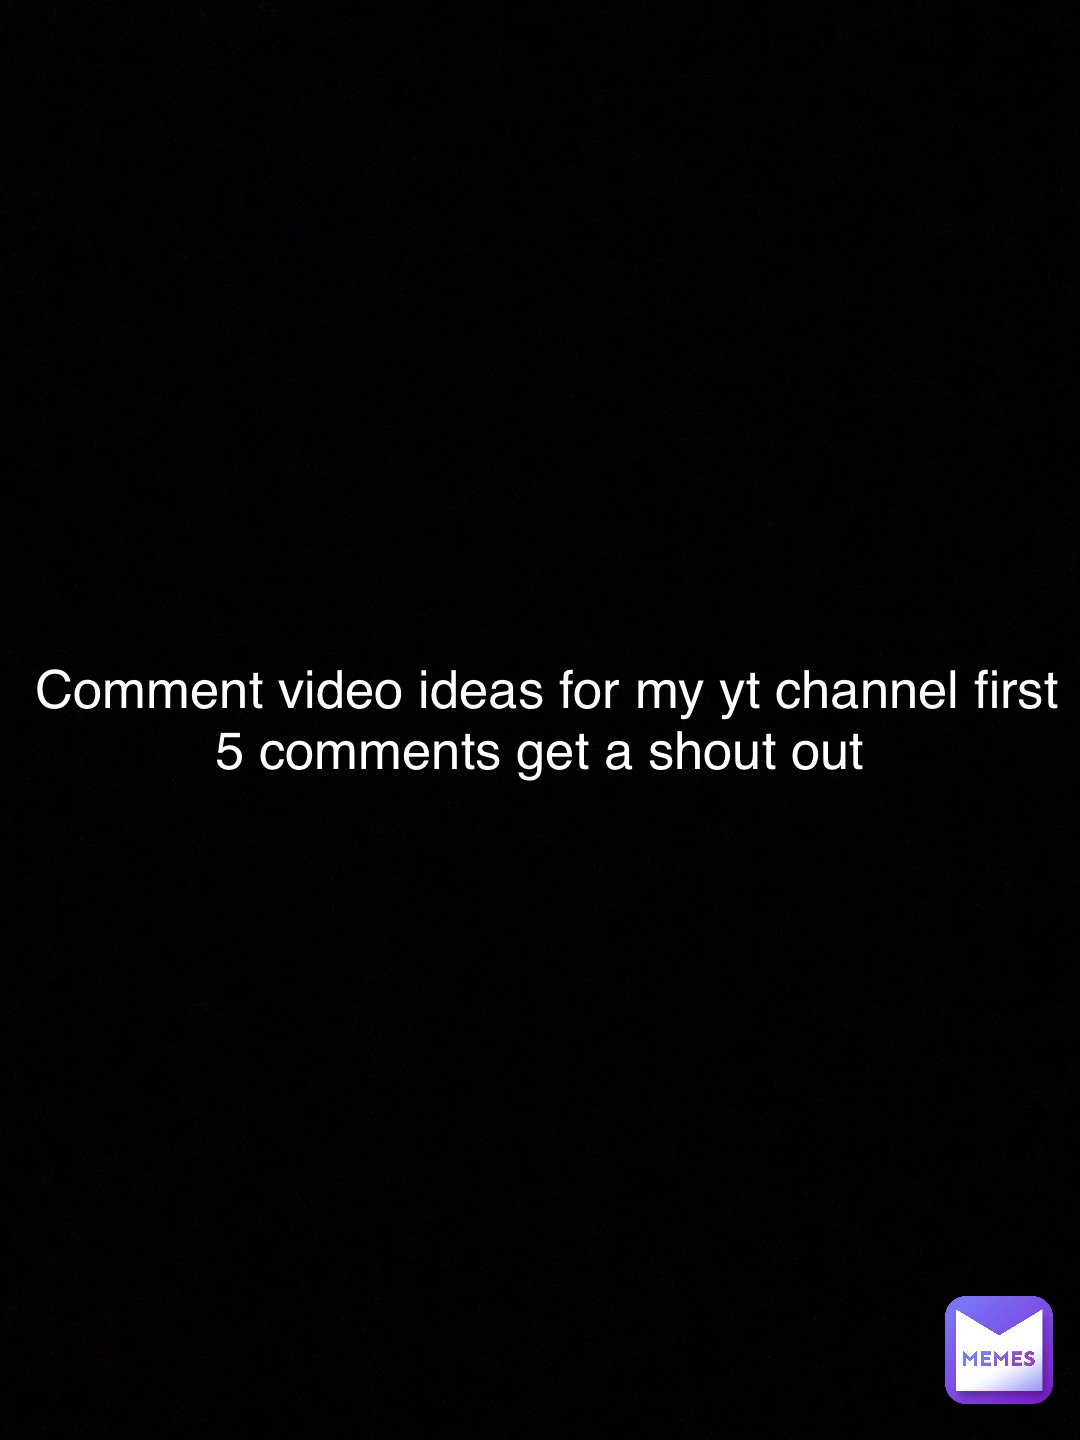 Comment video ideas for my yt channel first 5 comments get a shout out